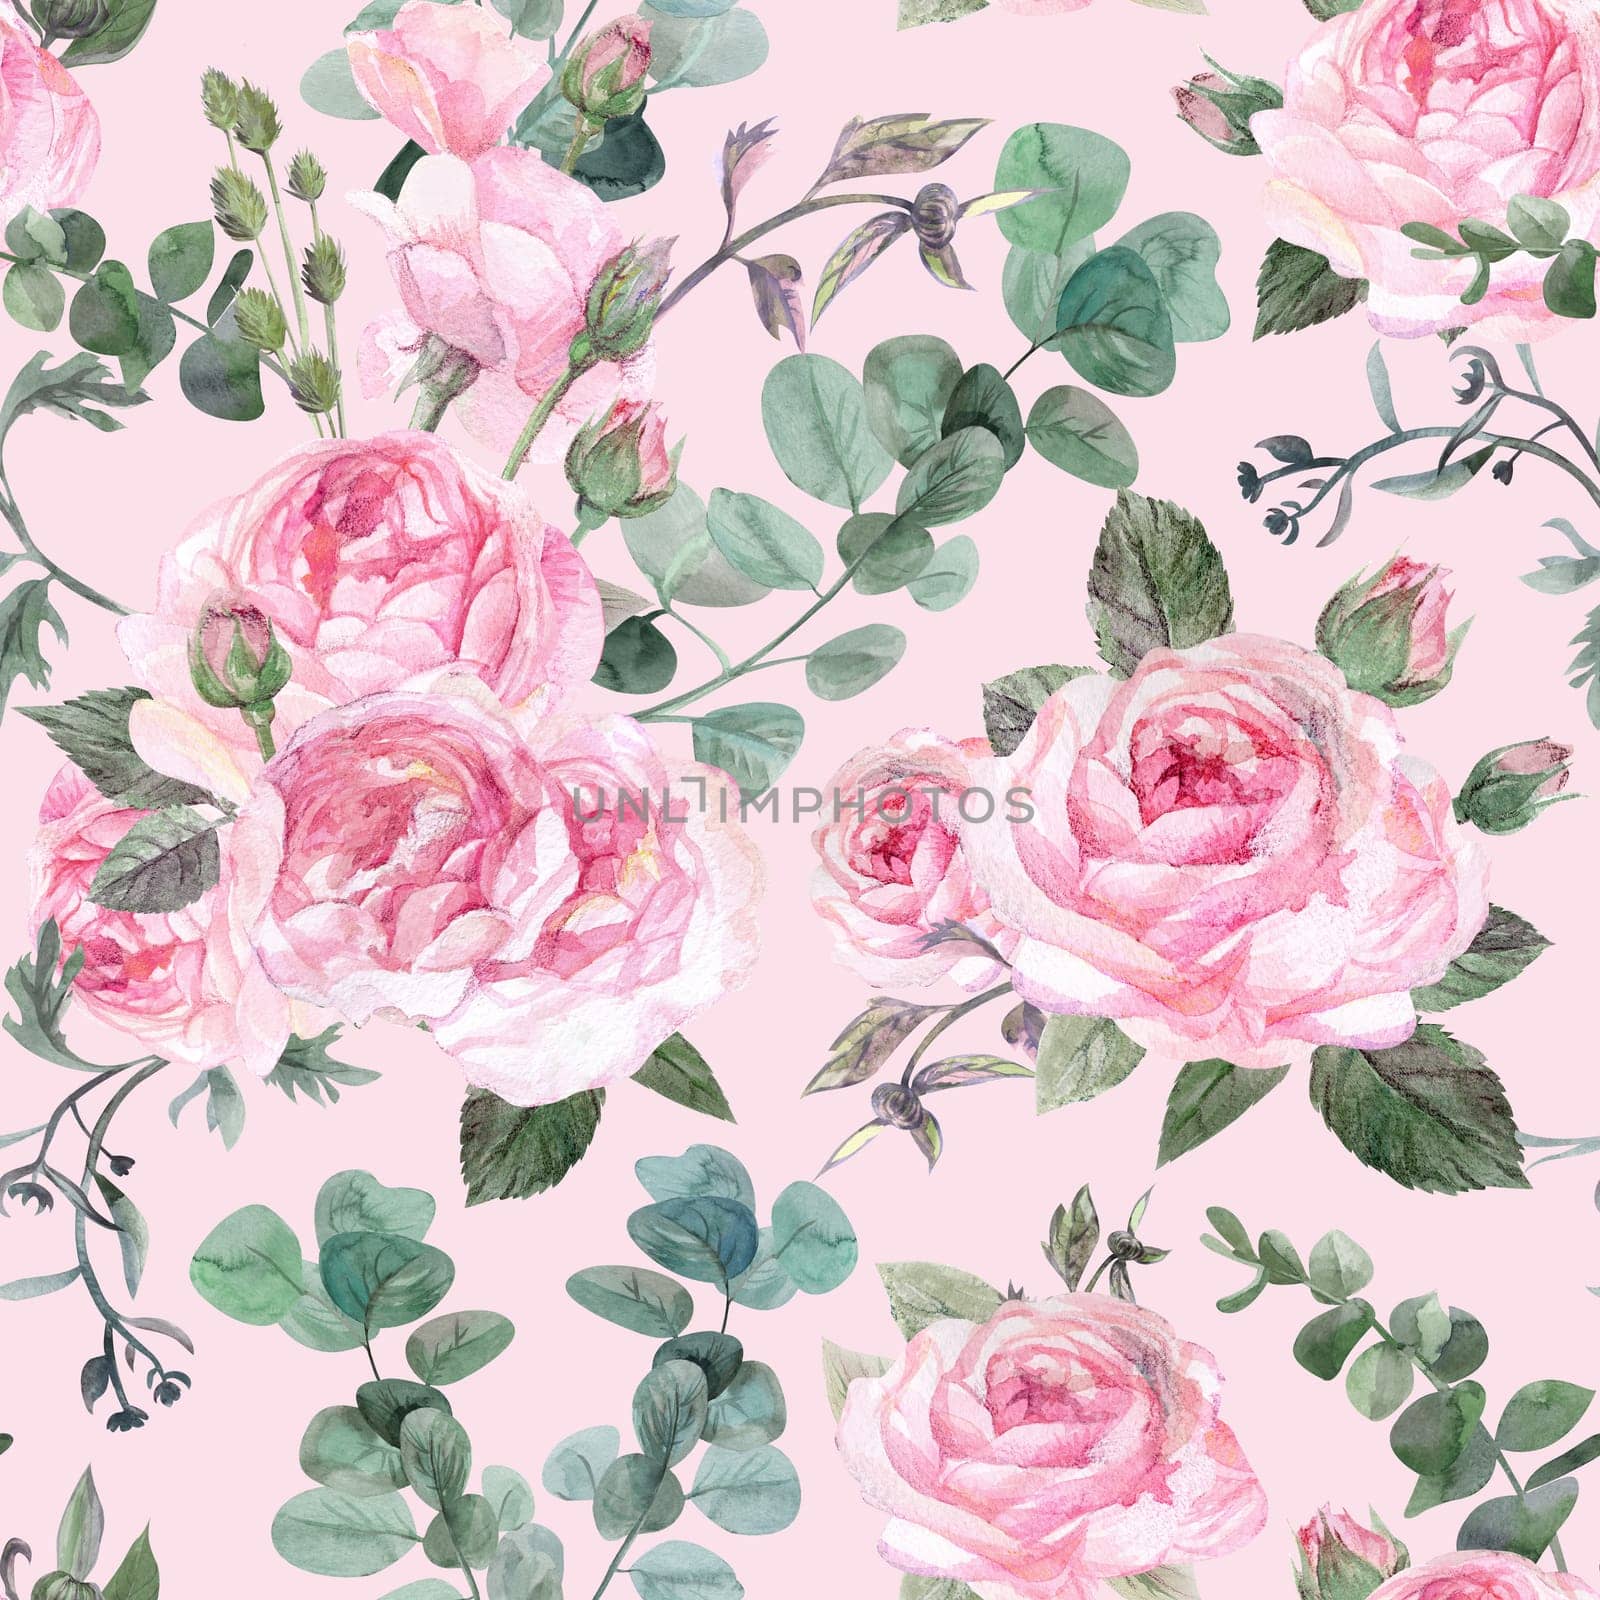 watercolor seamless pattern with pink roses on pink background on vintage stile for textiles and packaging and surface design